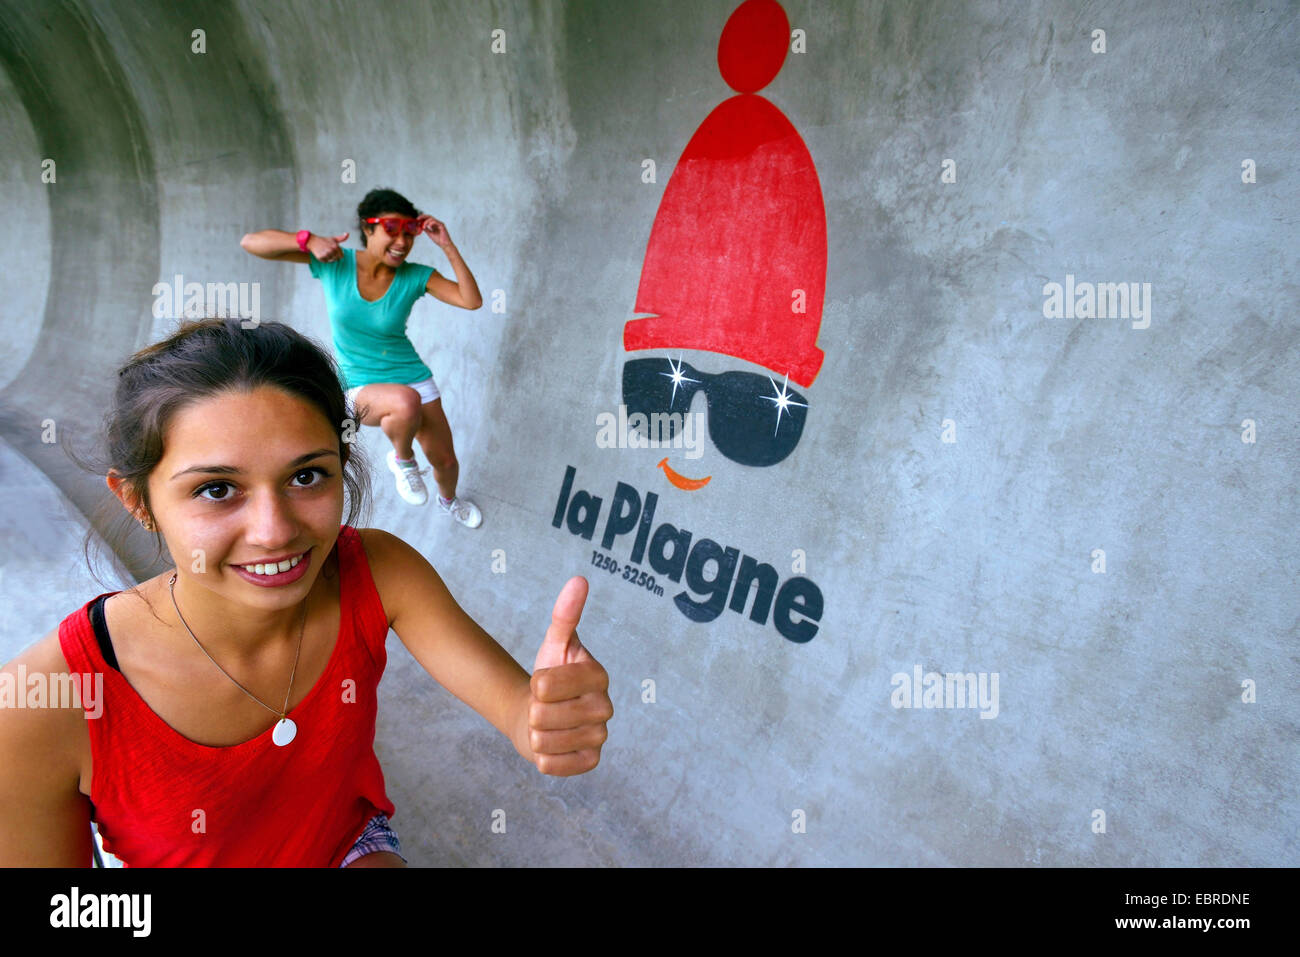 two young women running on the bobsleigh track in summer, France, Savoie, La Plagne Stock Photo